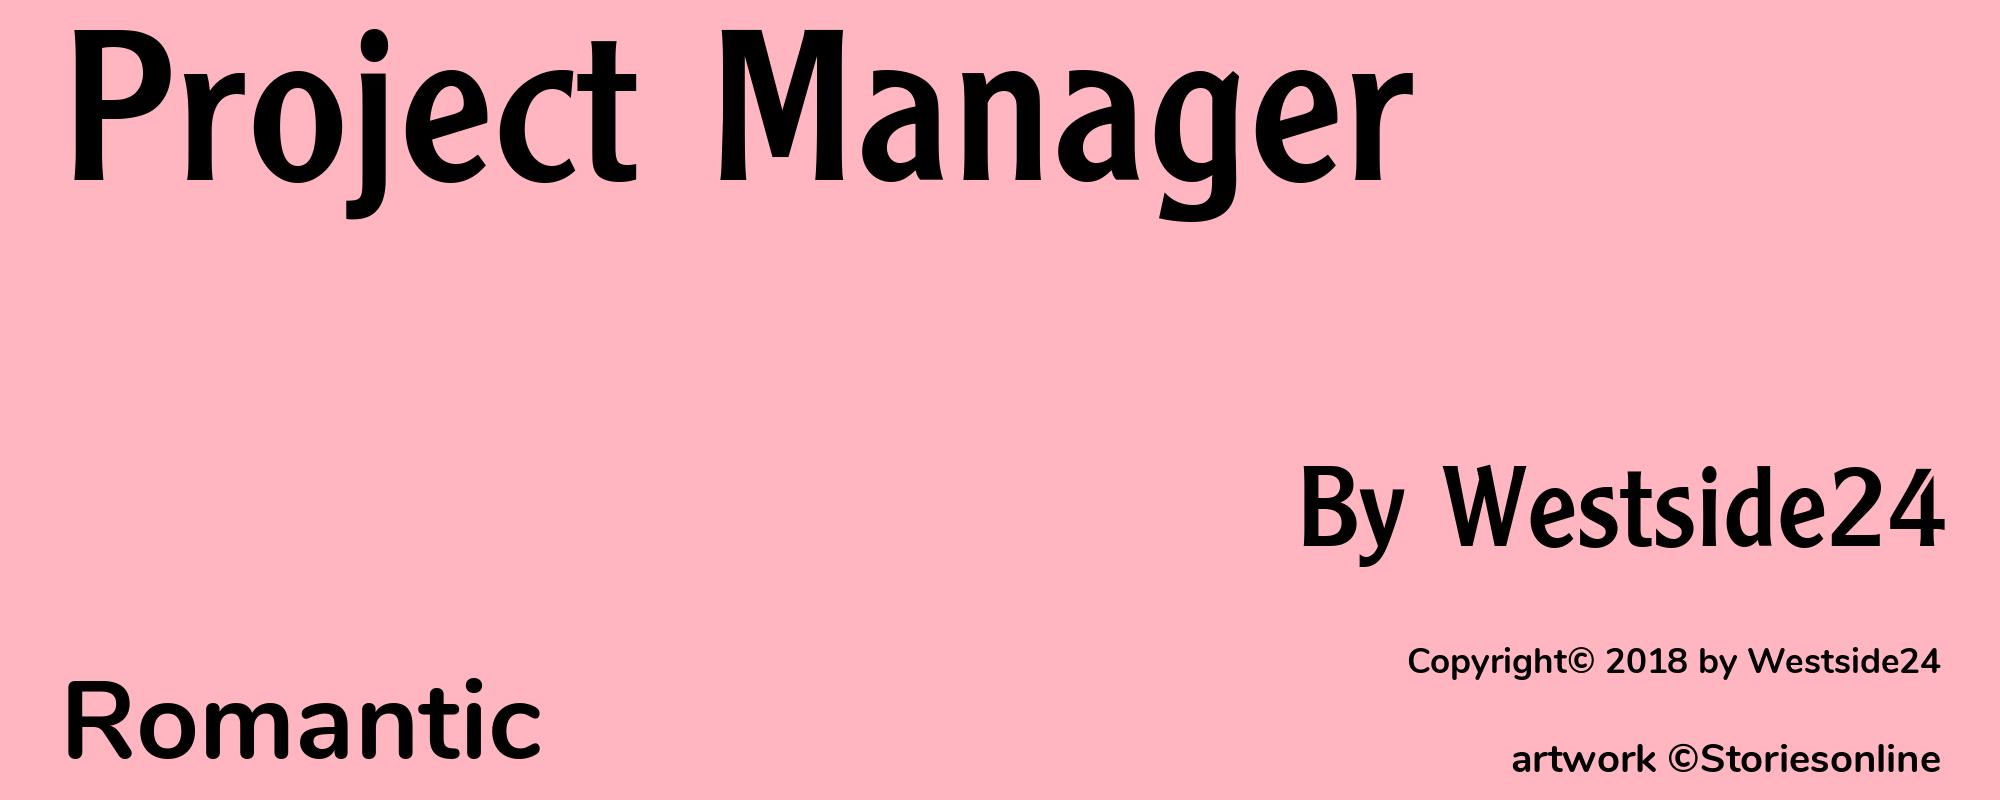 Project Manager - Cover